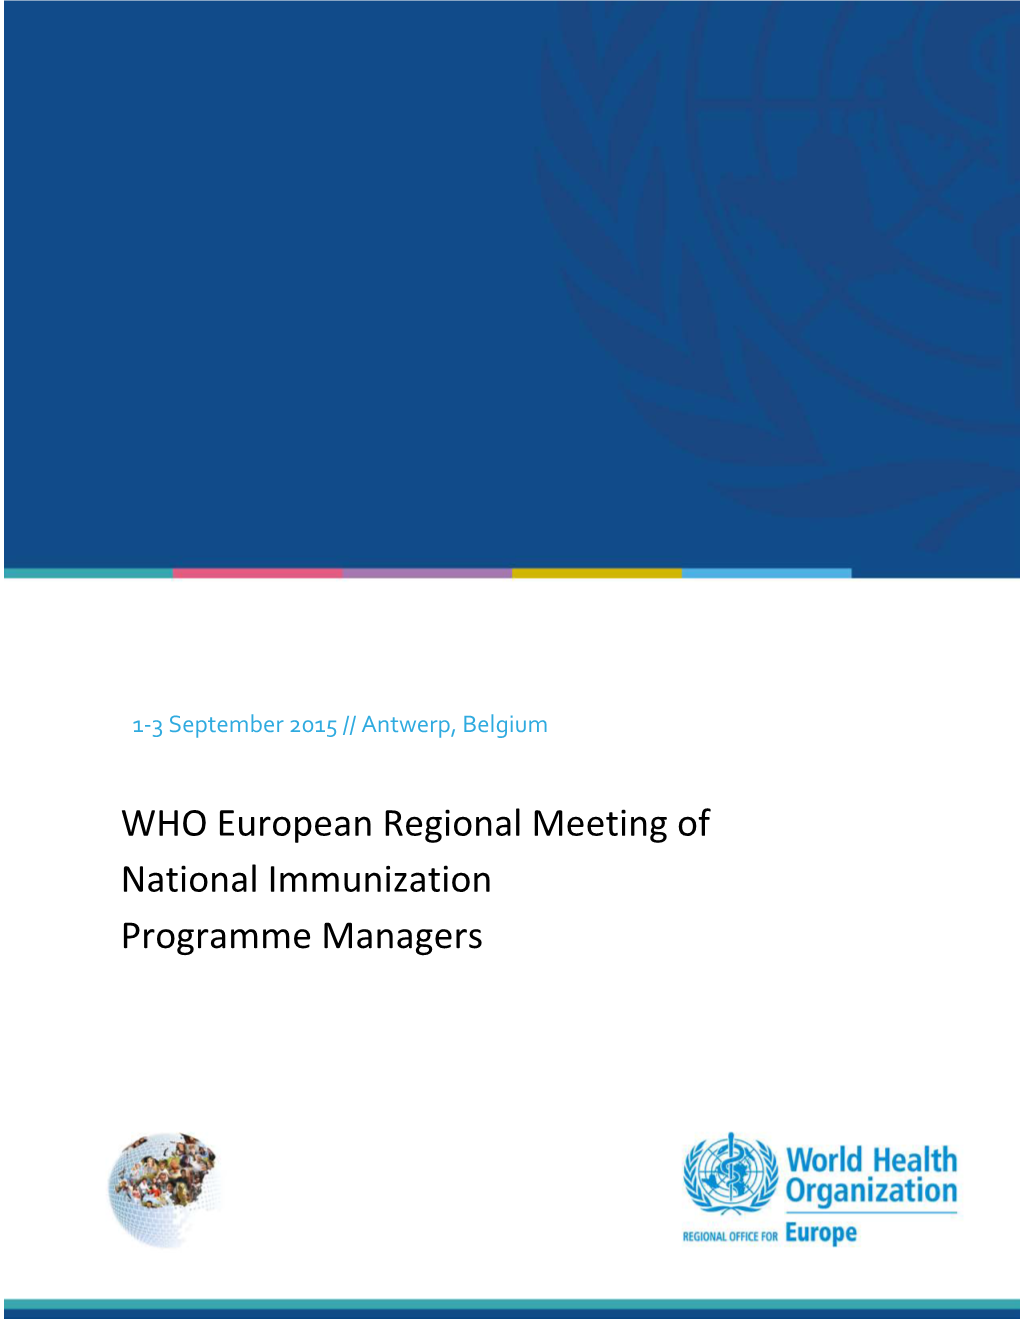 WHO European Regional Meeting of National Immunization Programme Managers